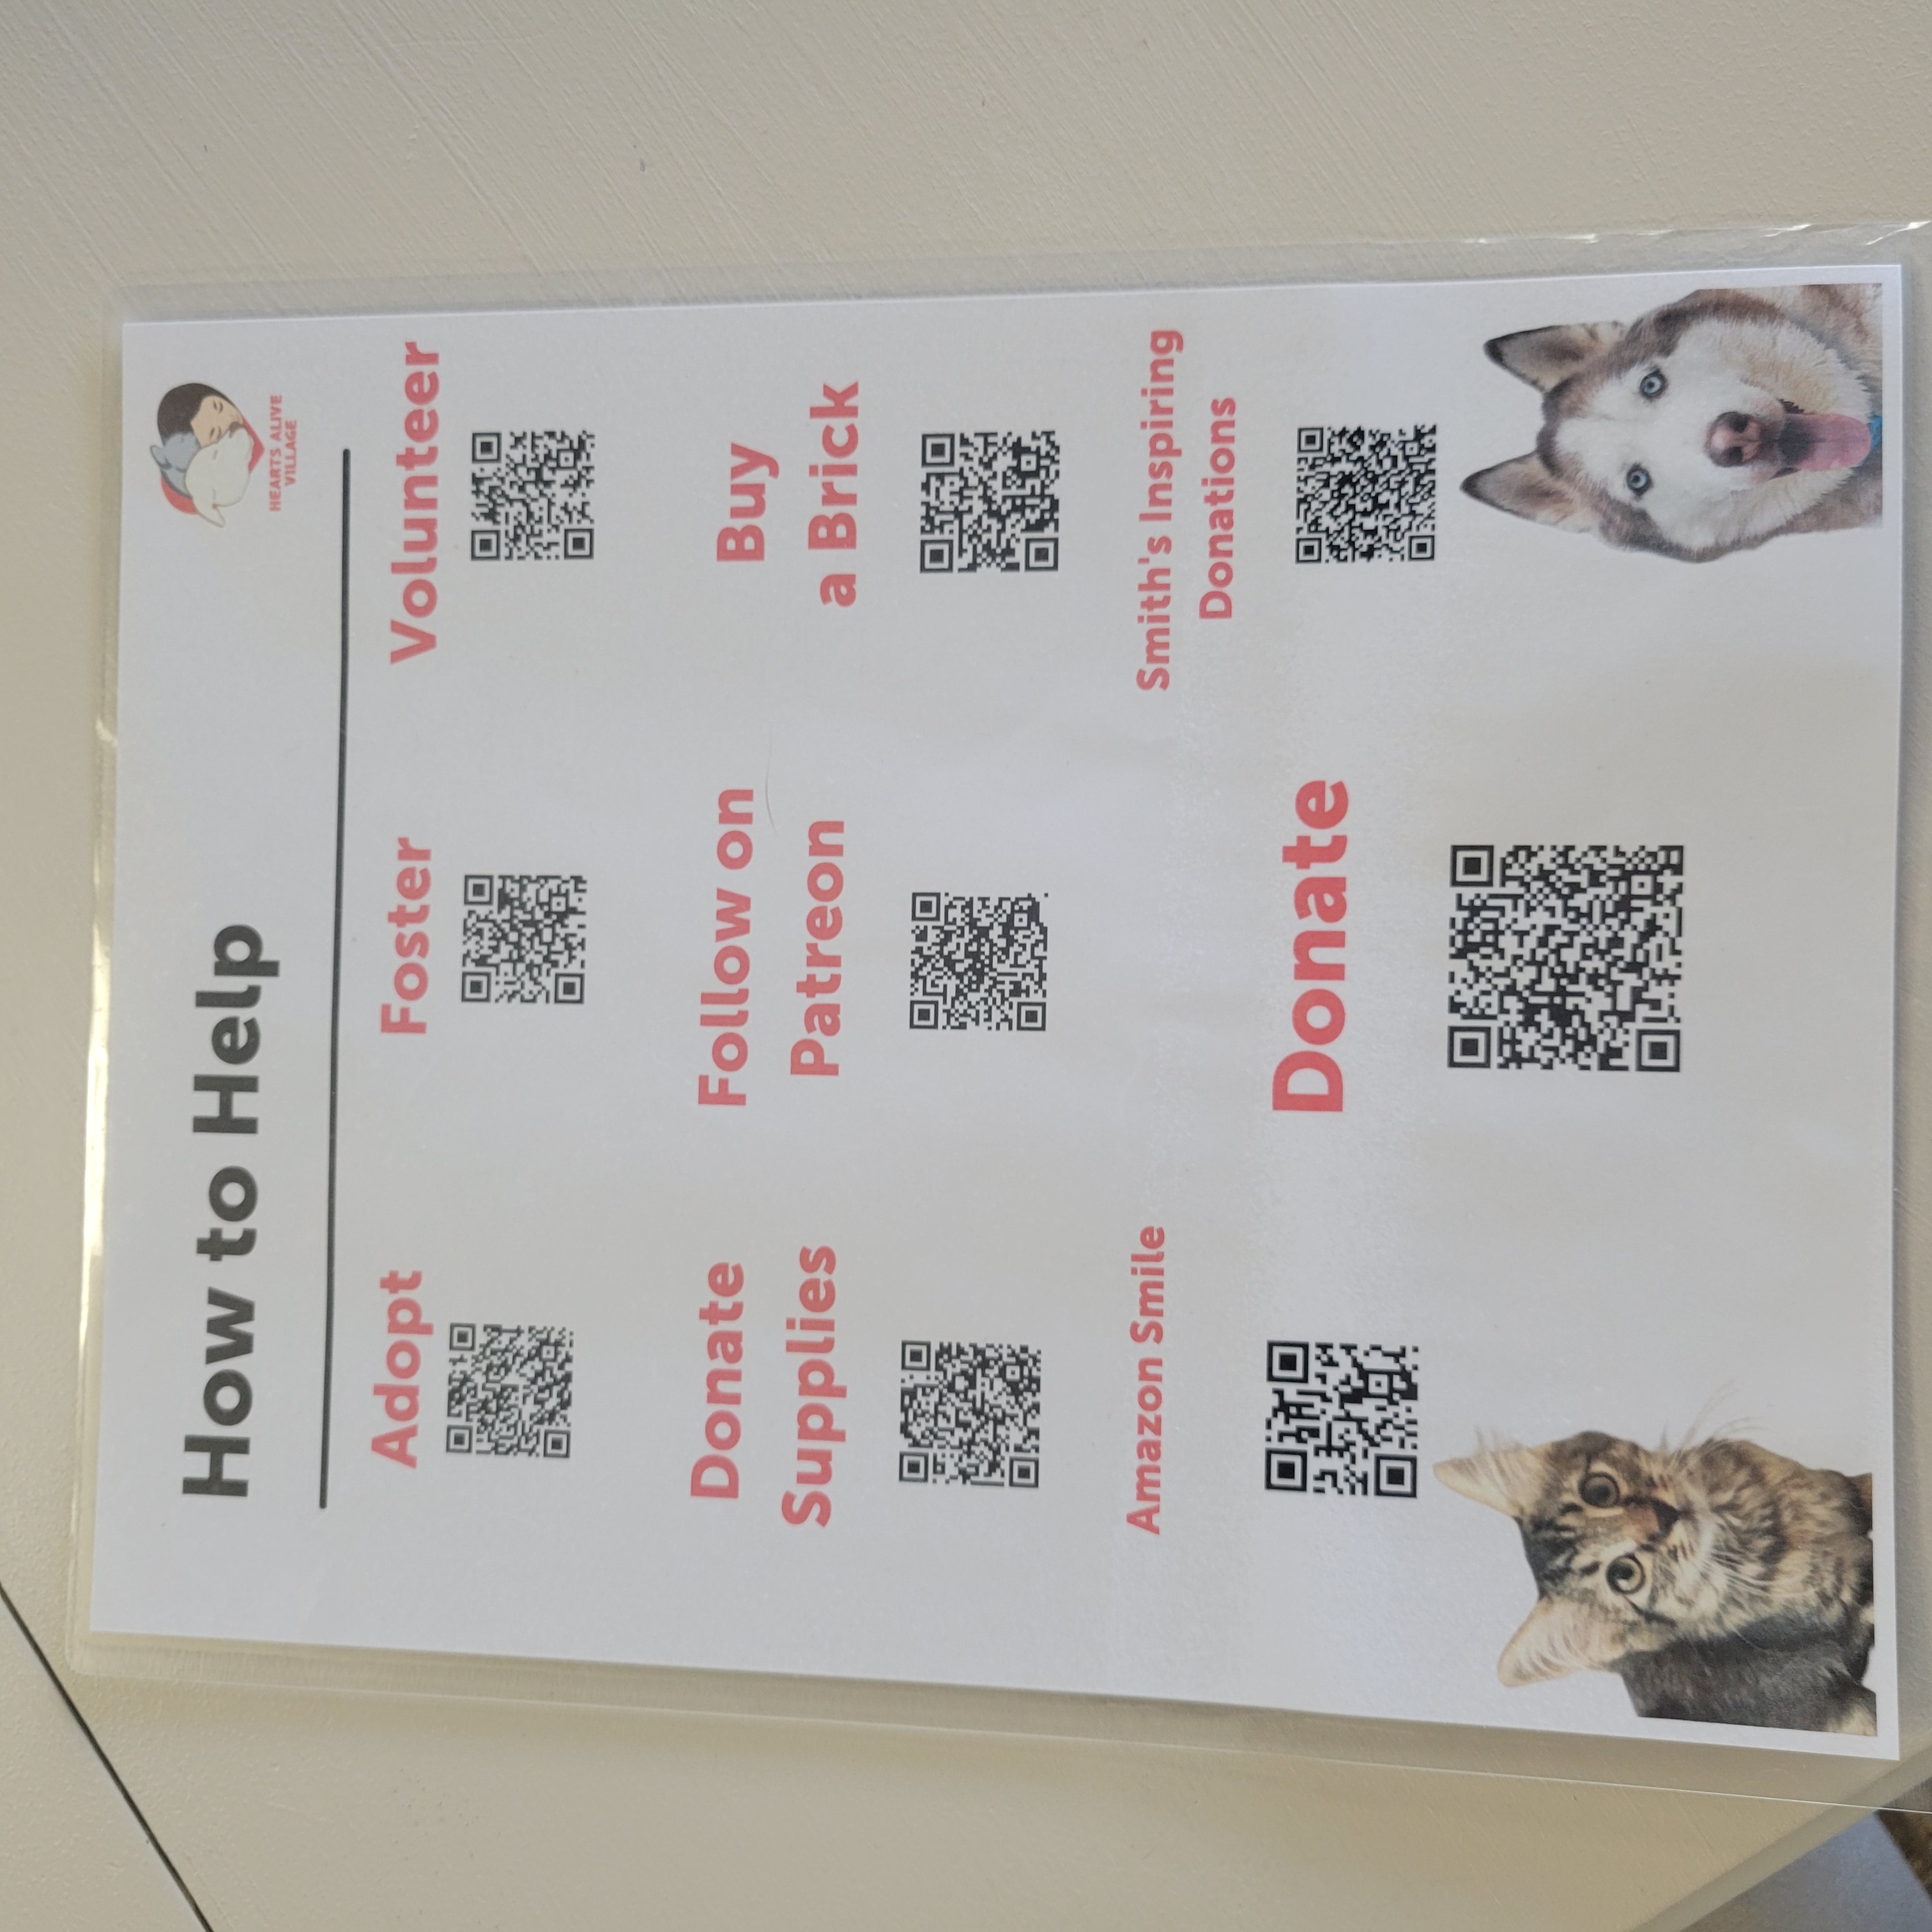 Image of a flyer with various QR codes for people to scan with opportunities to get involved with Hearts Alive Village  